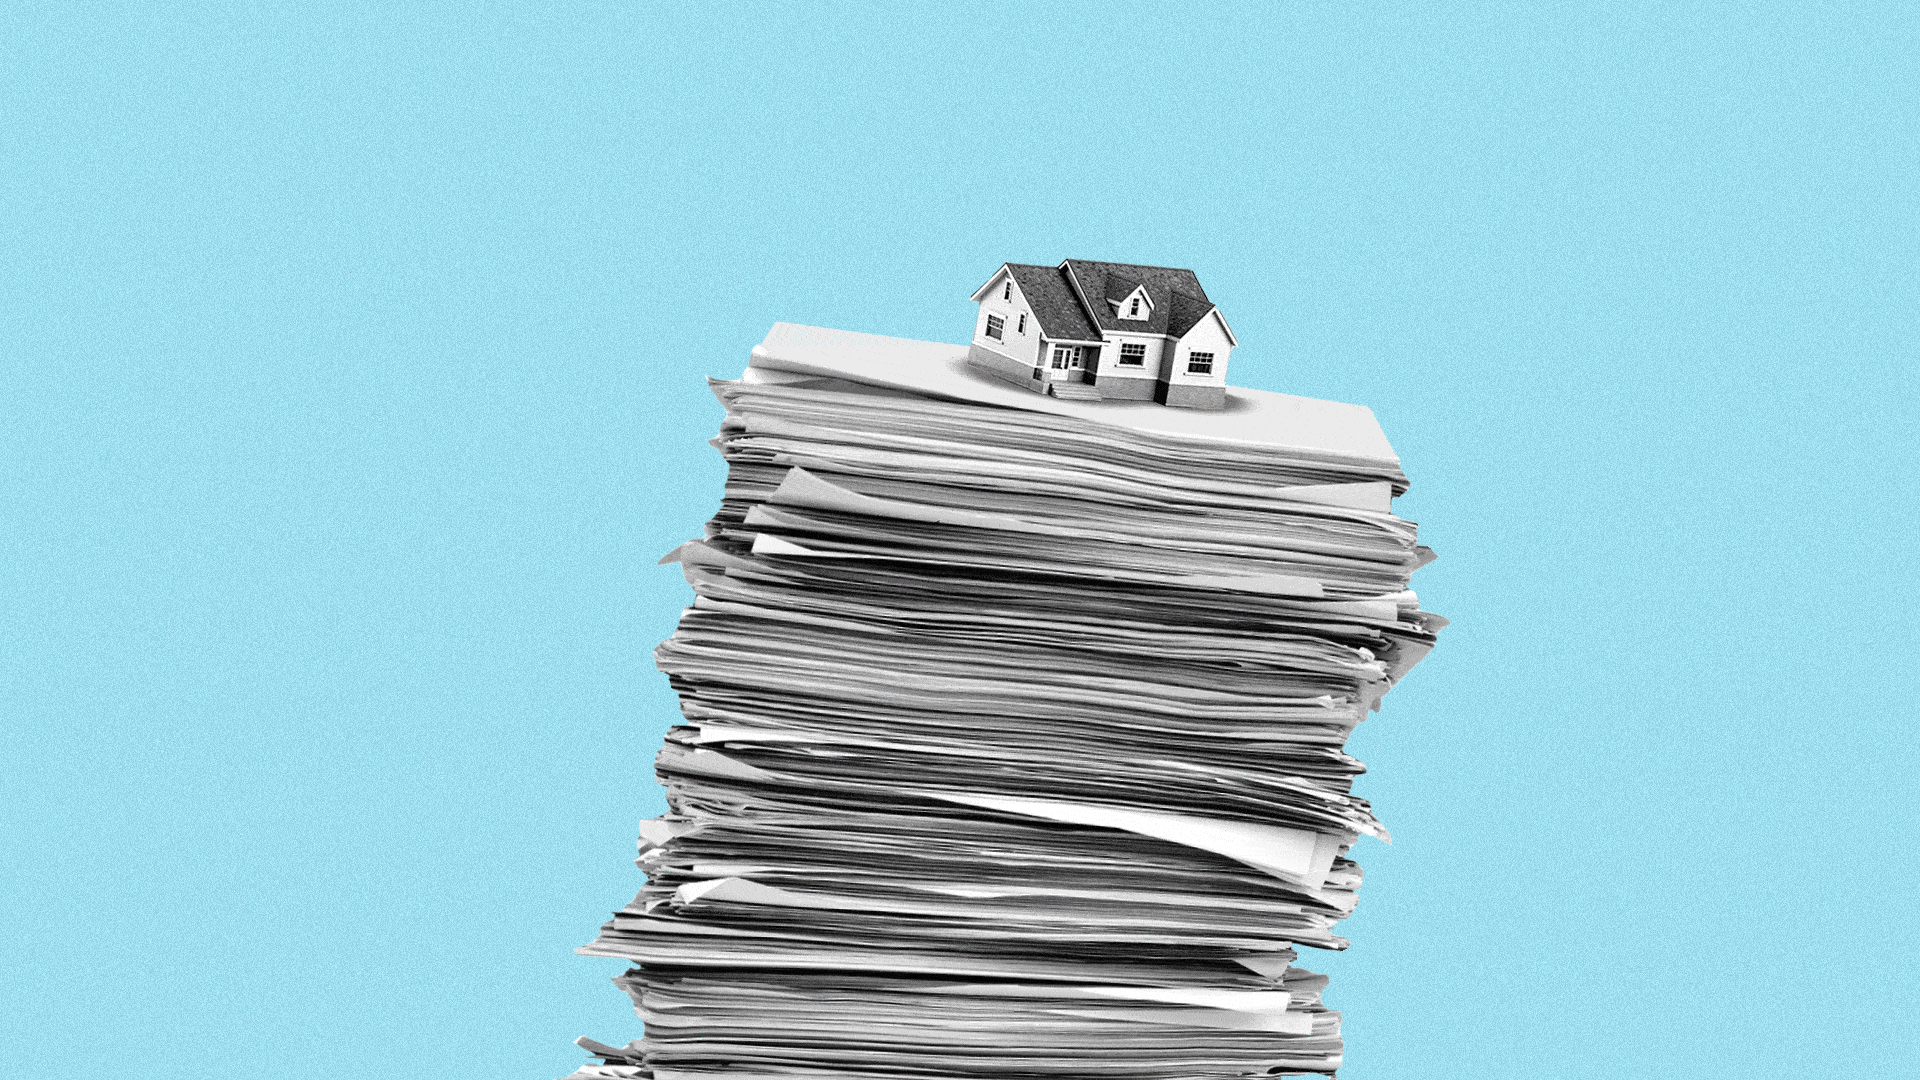 GIF of a house teetering on a stack of papers.